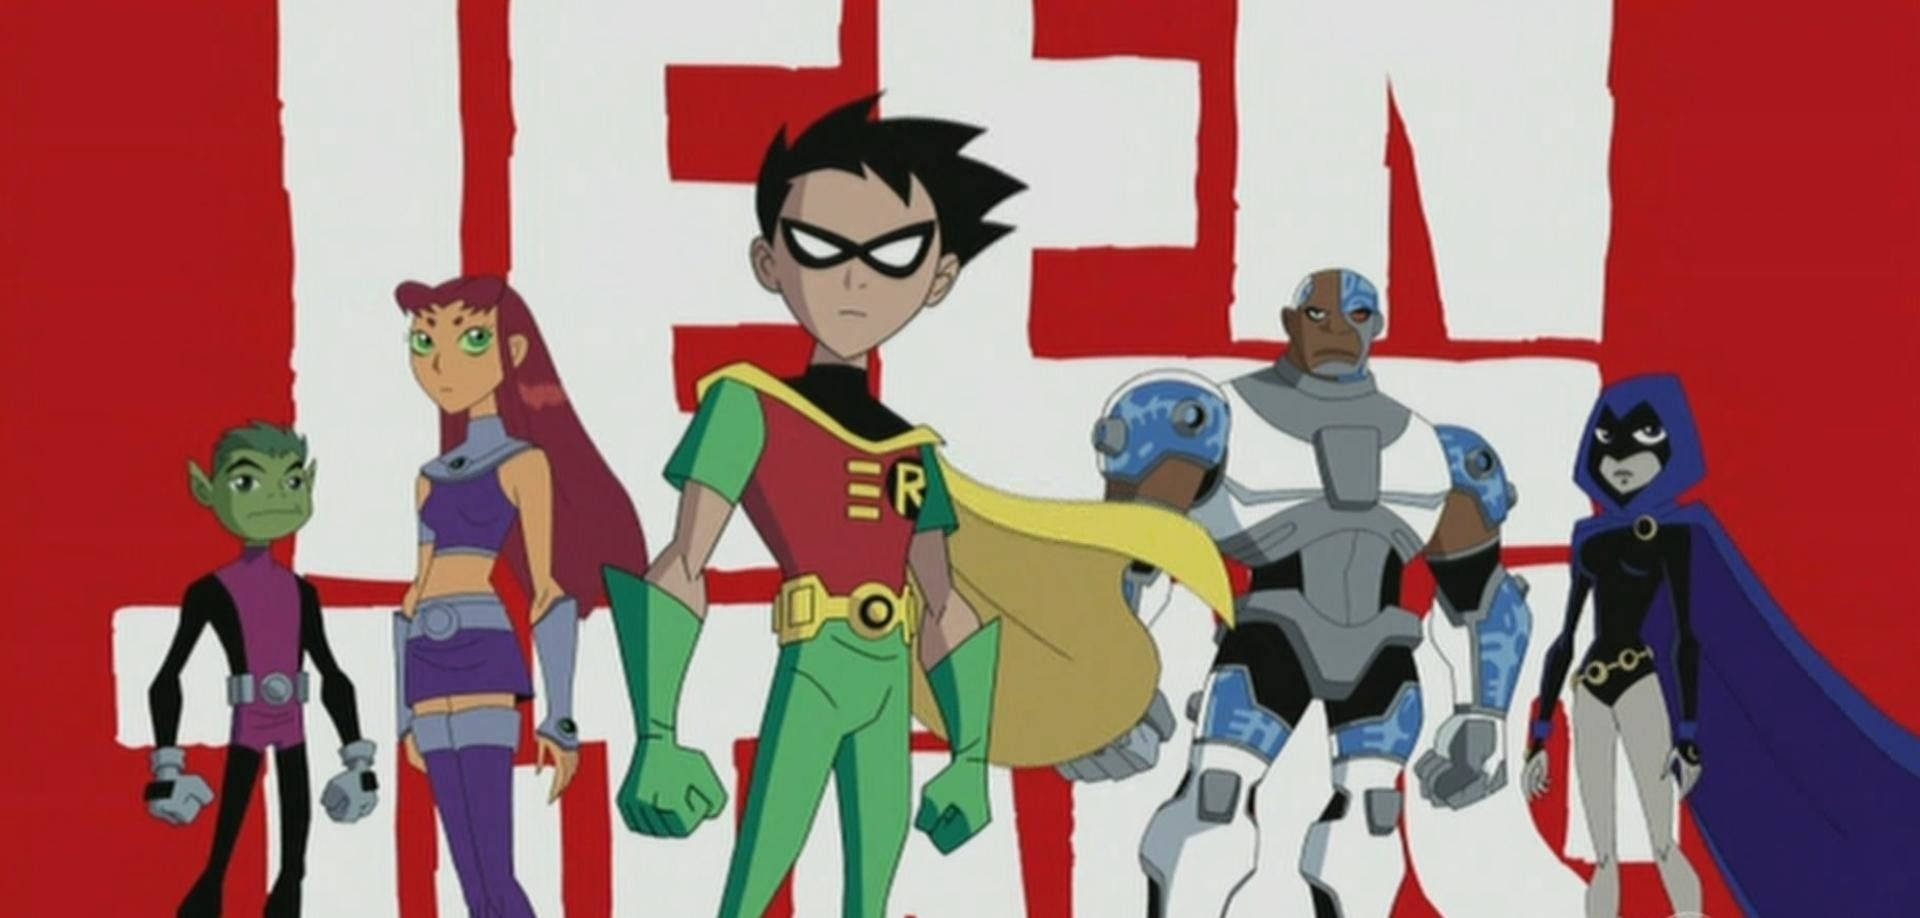 Teen Titans Animated Poster Wallpaper